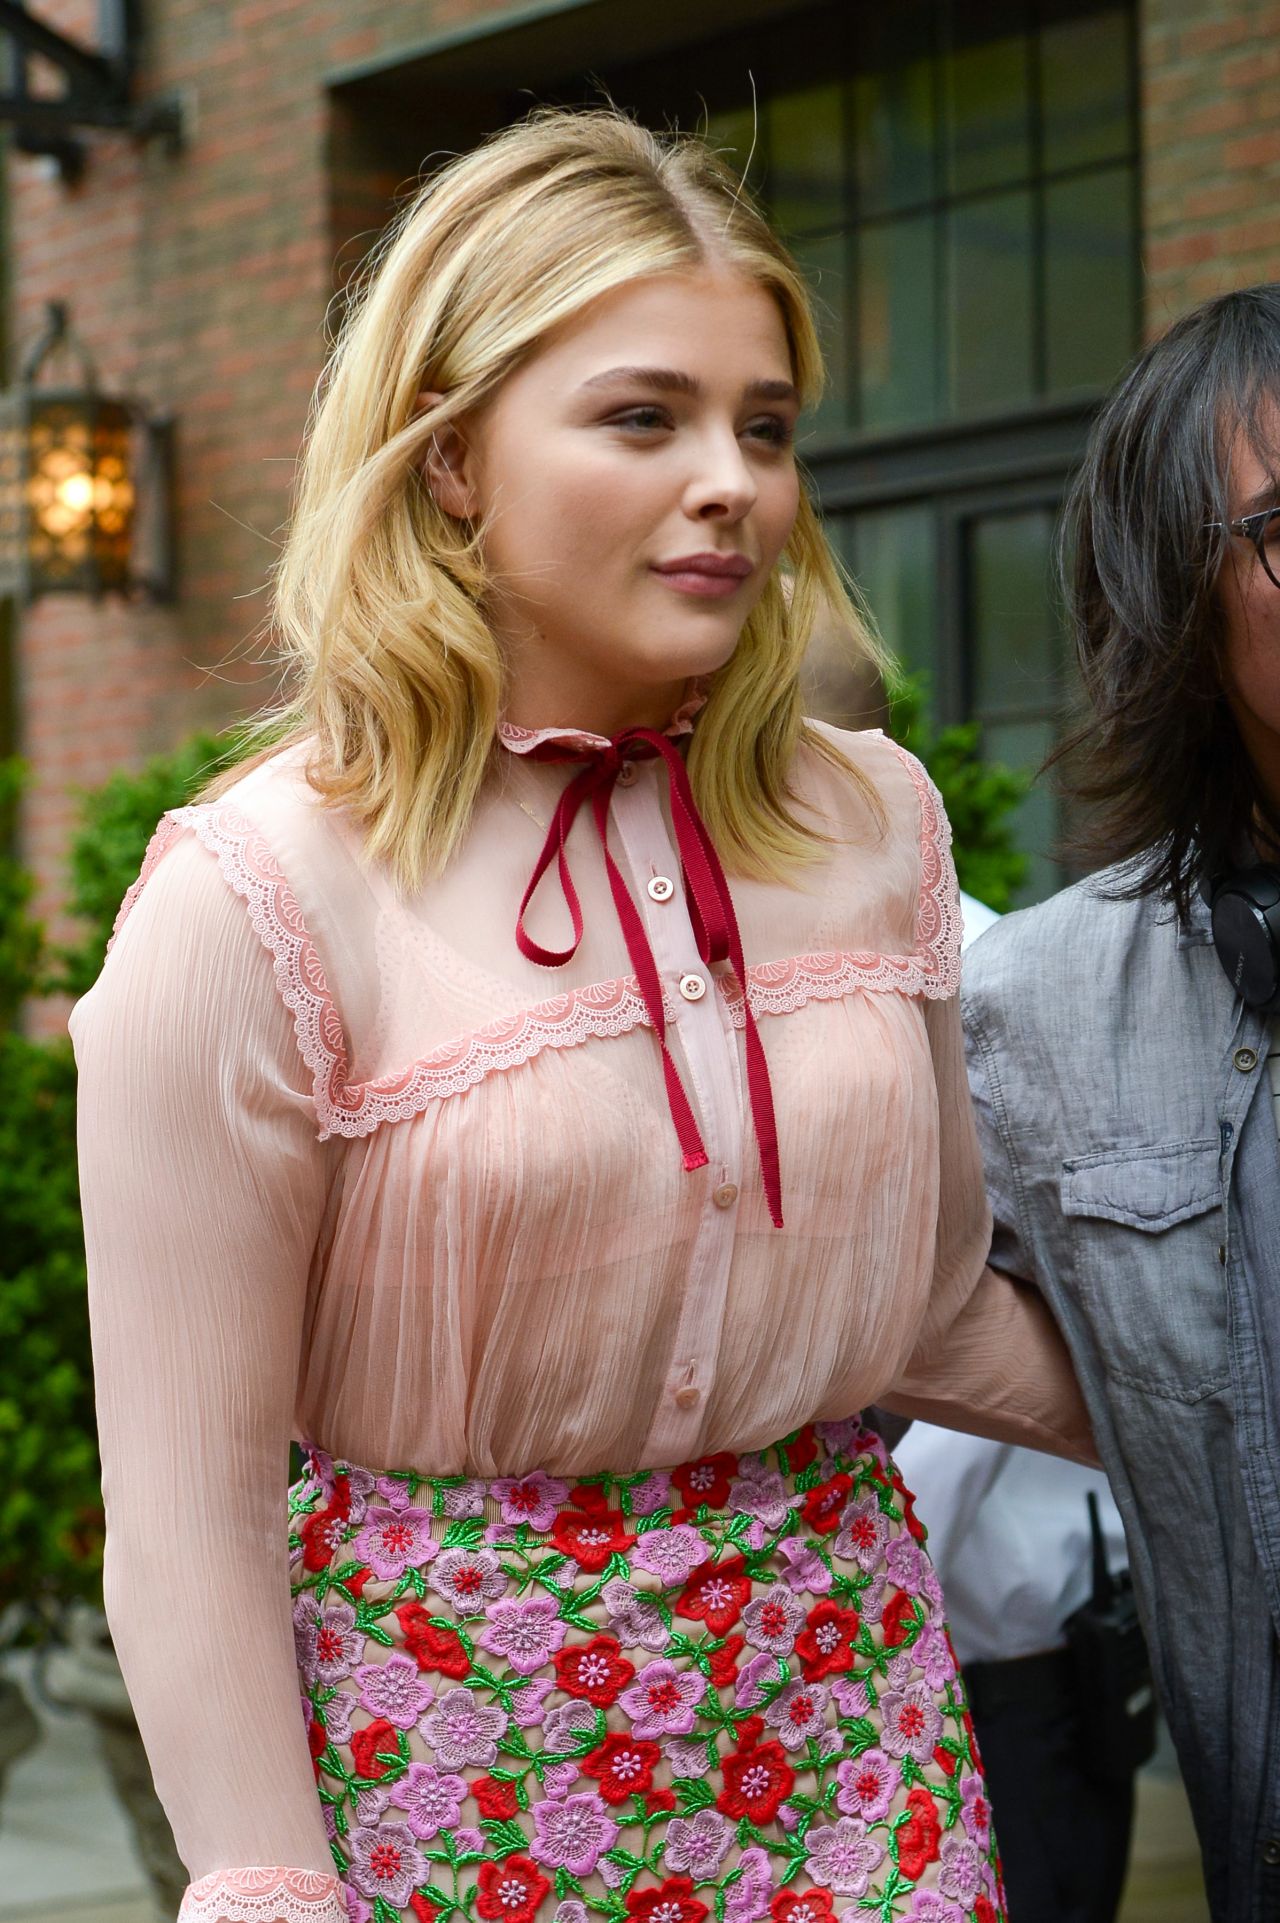 Gotta have Chlomo — Chloë Moretz out & about in NYC. [May 24, 2016]